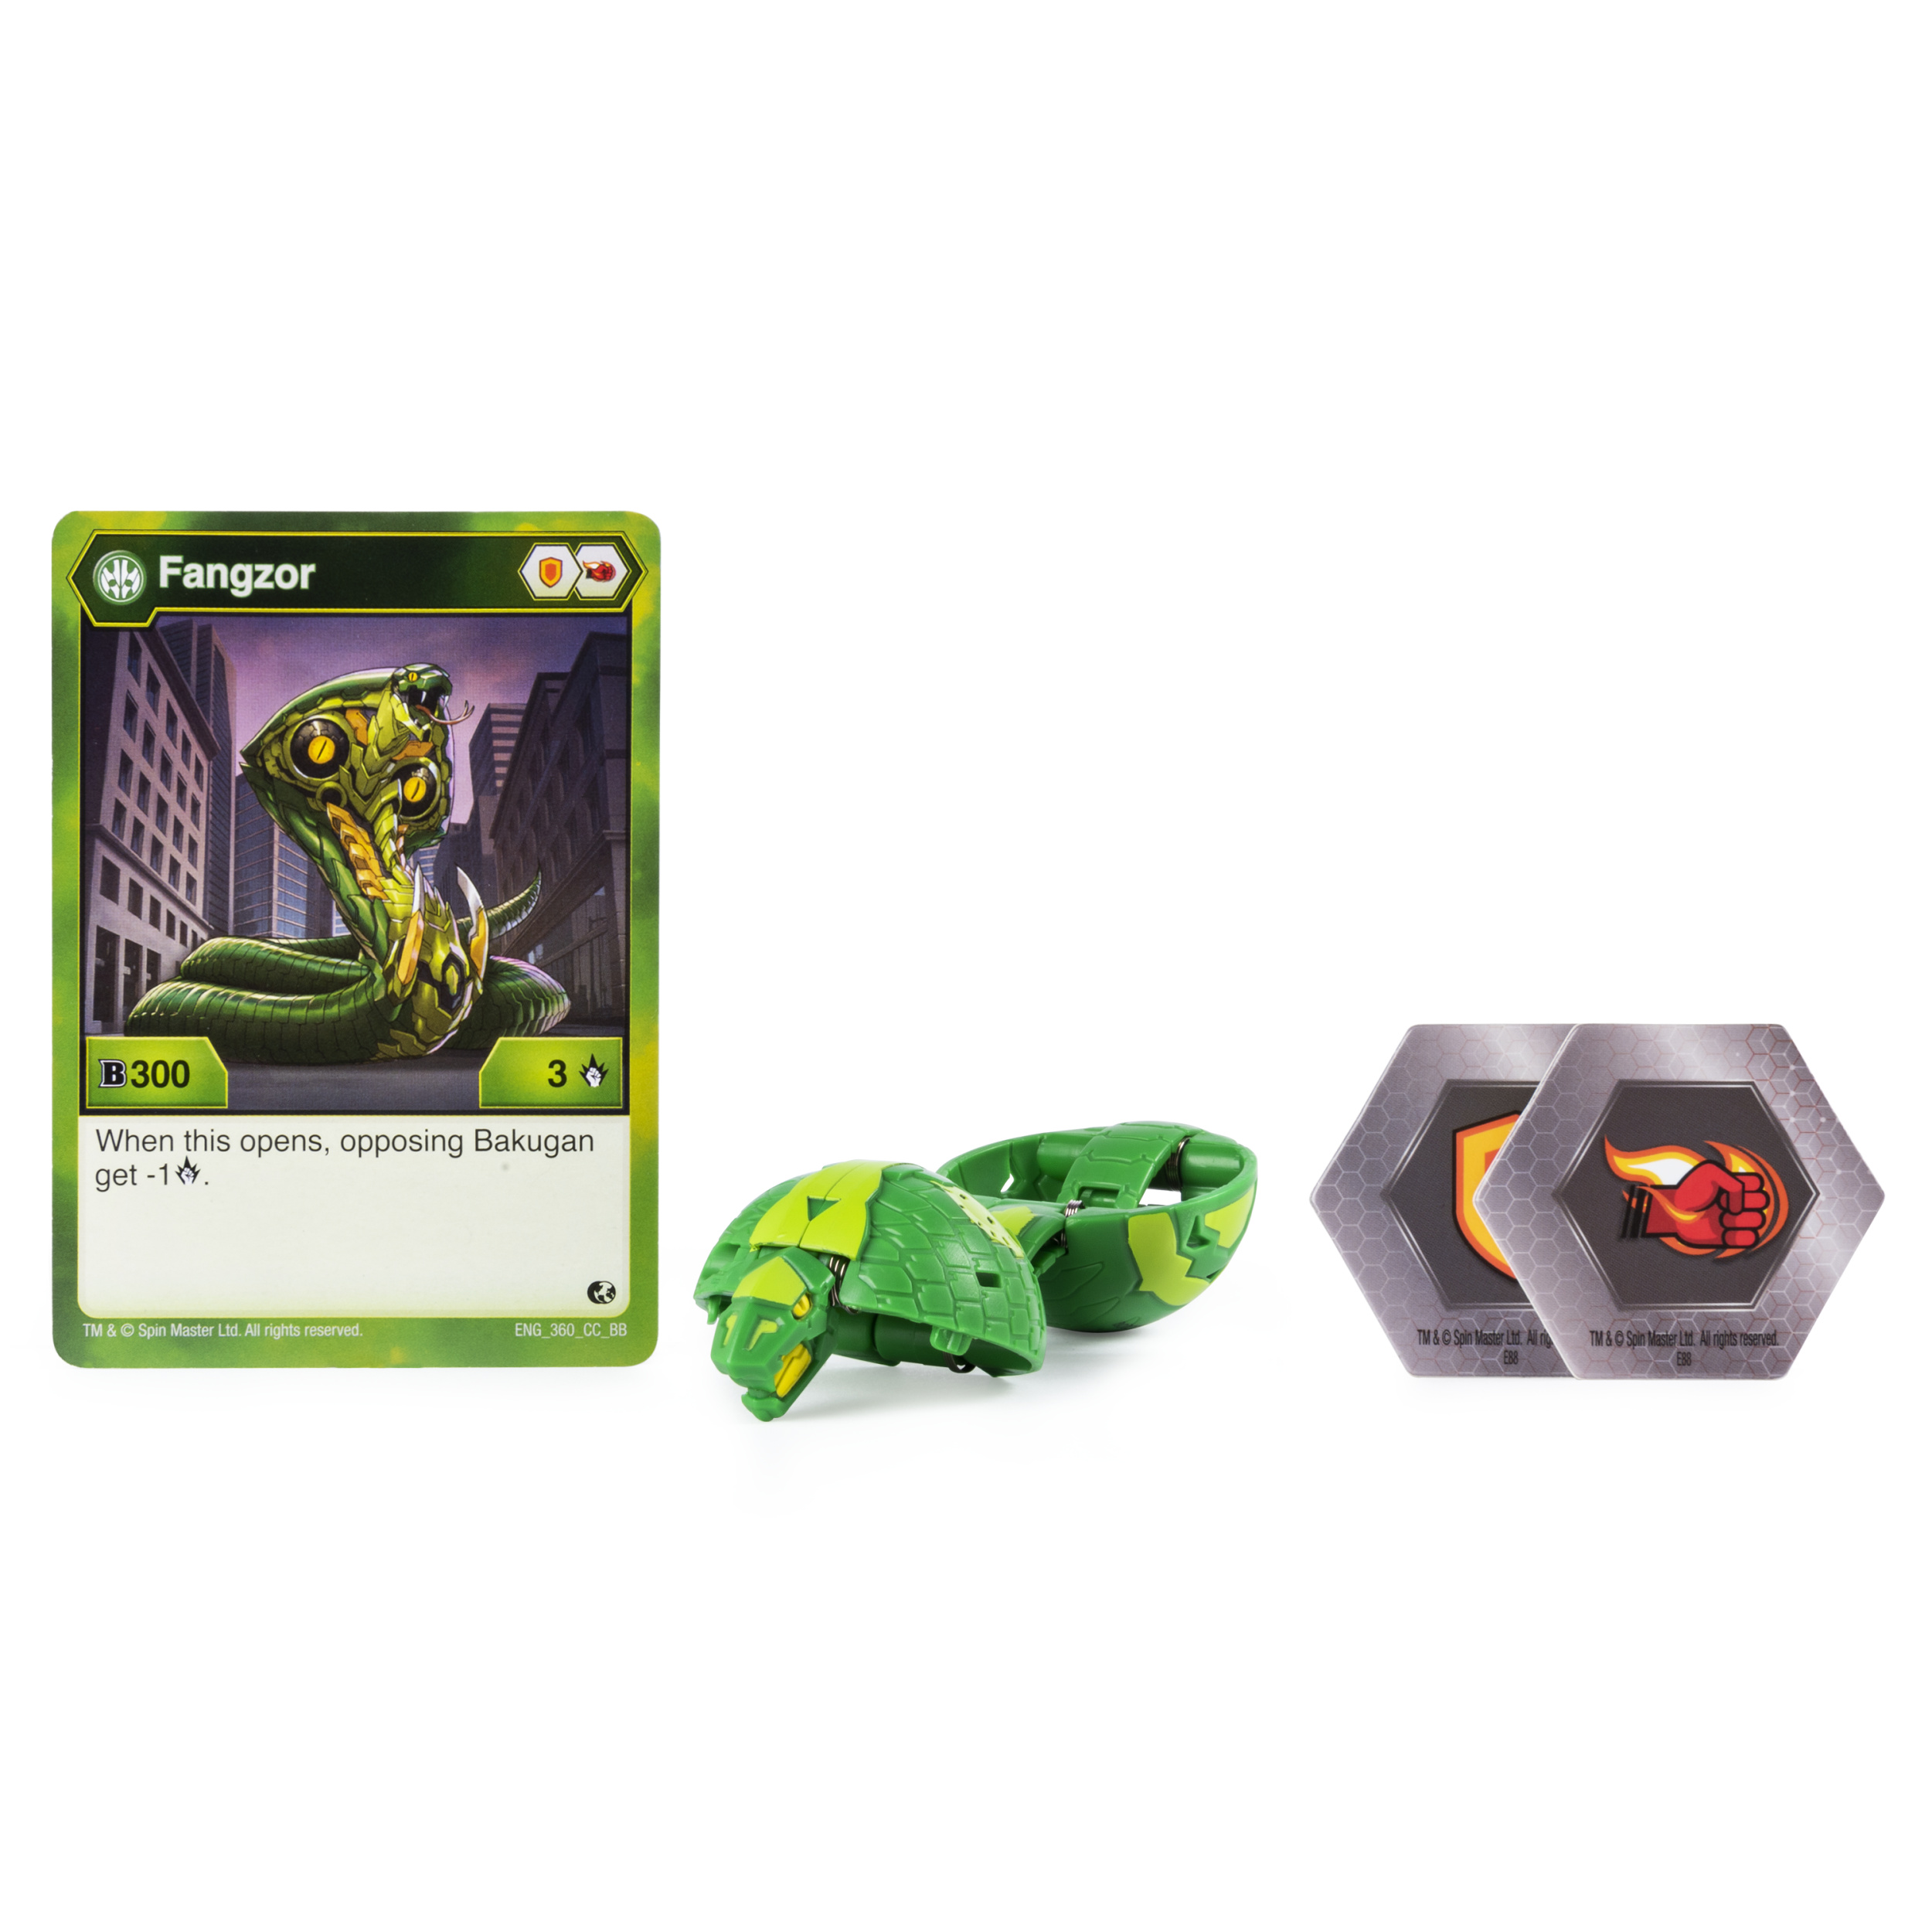 Bakugan, Ventus Fangzor, 2-inch Tall Collectible Action Figure and Trading Card, for Ages 6 and Up - image 2 of 5